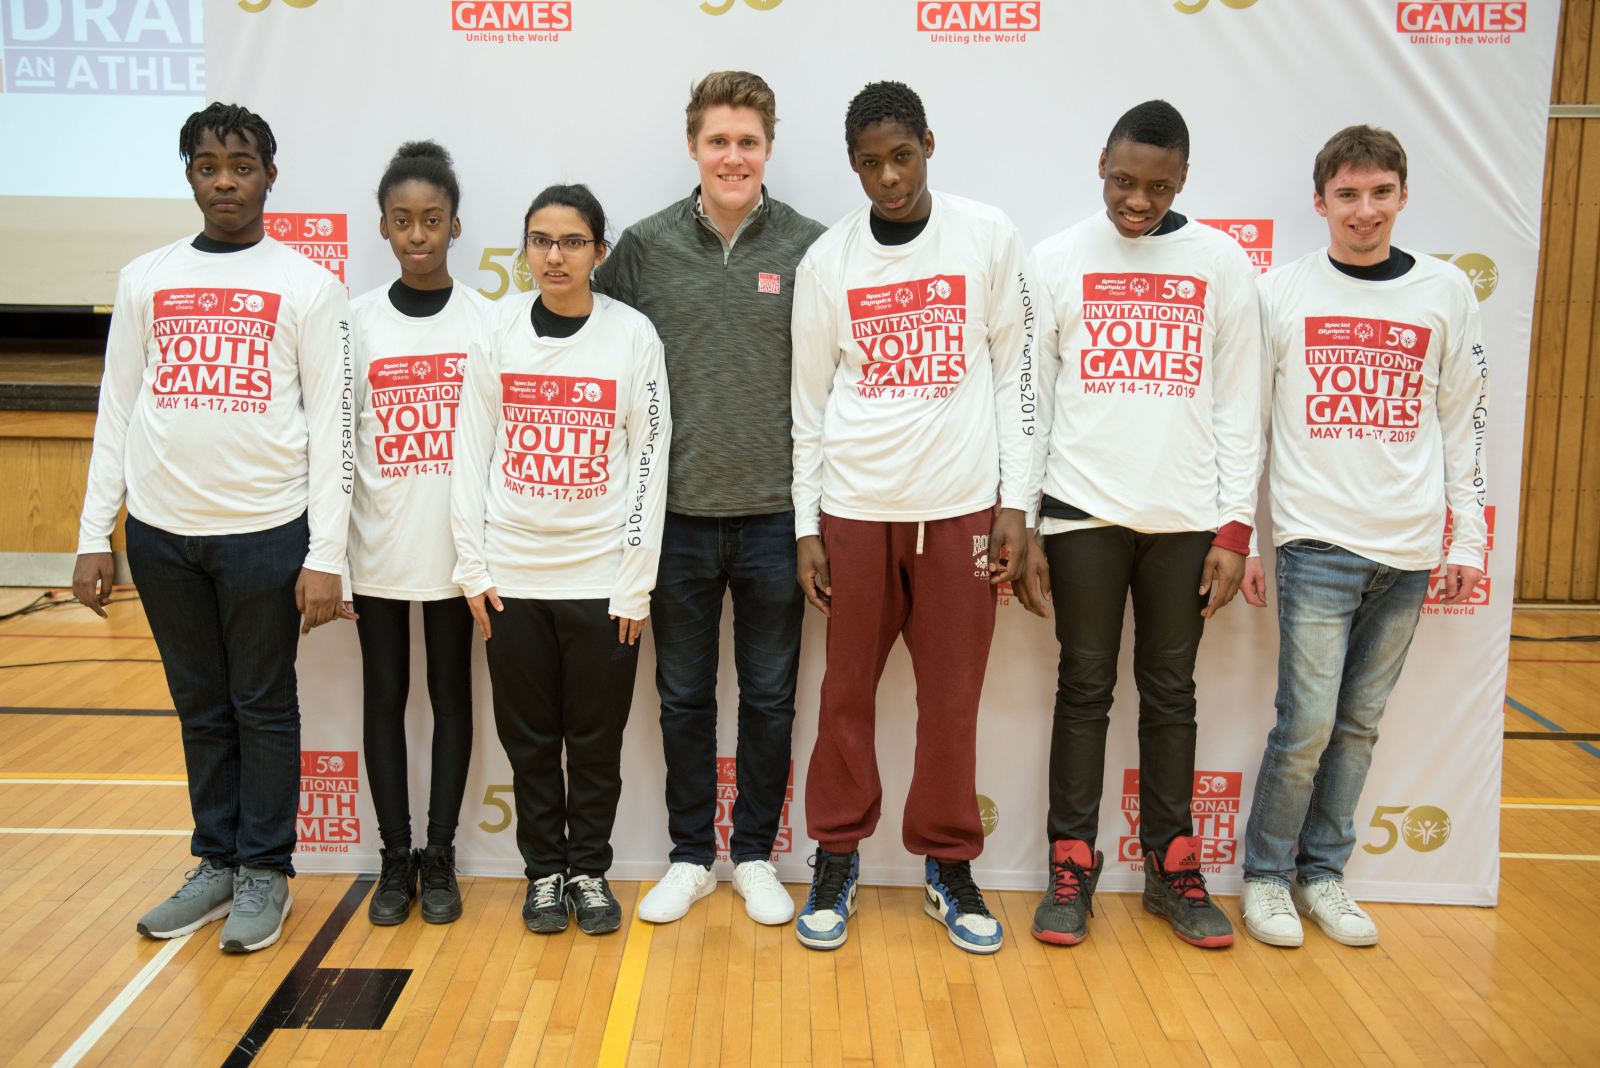 6 students posing in front of a branded backdrop with an adult